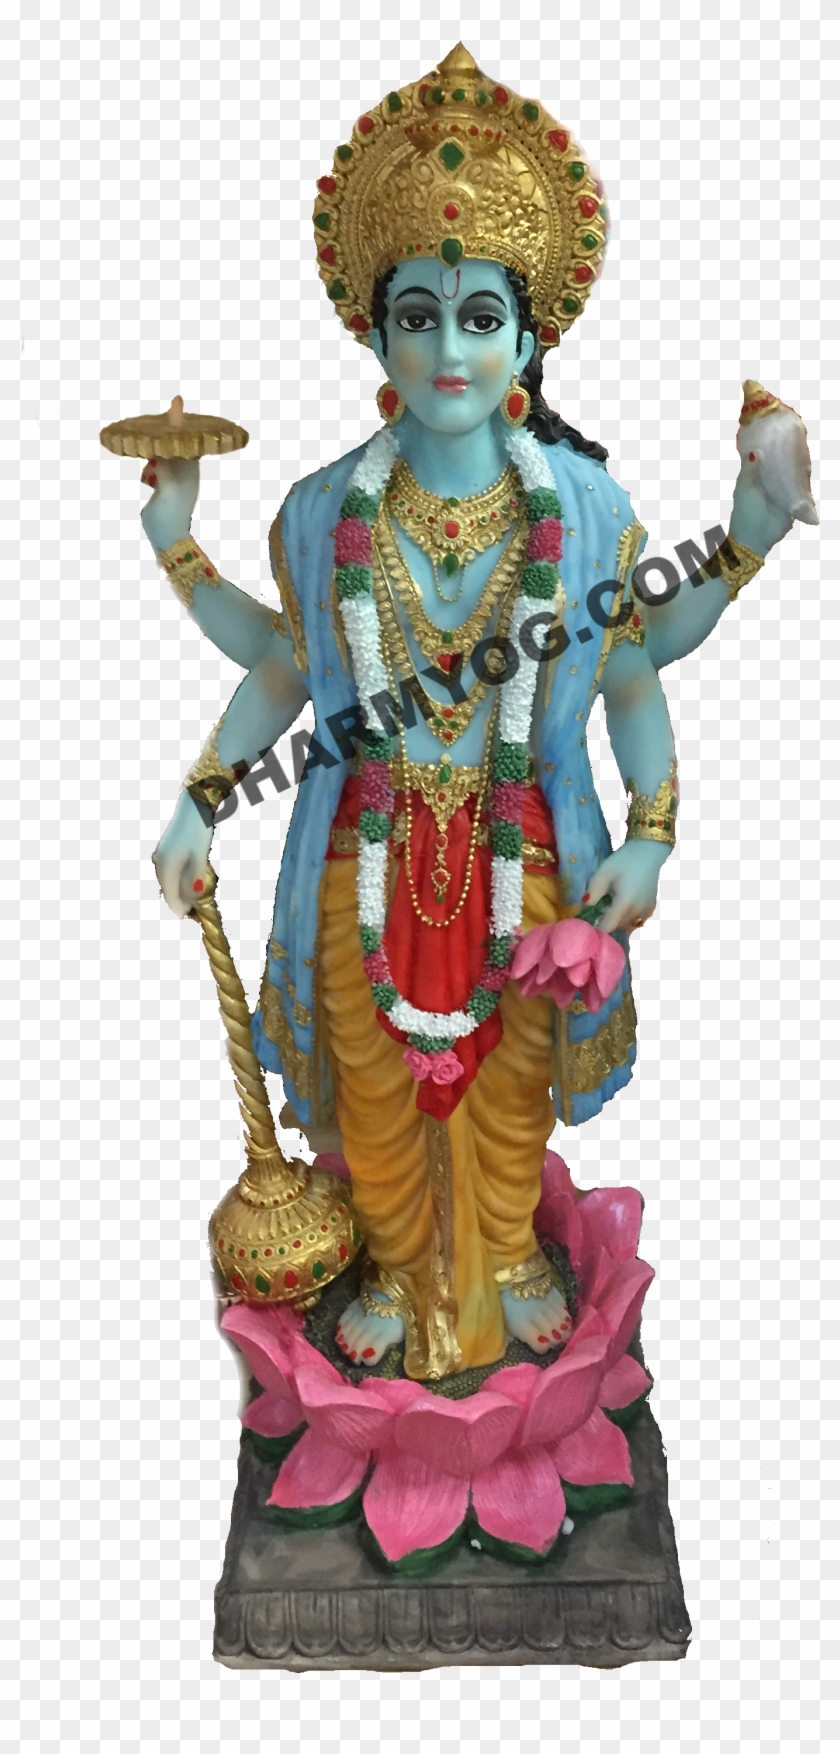 Hindus Consider Lord Krishn As The Eighth Avatar Or - Statue Clipart #2585121